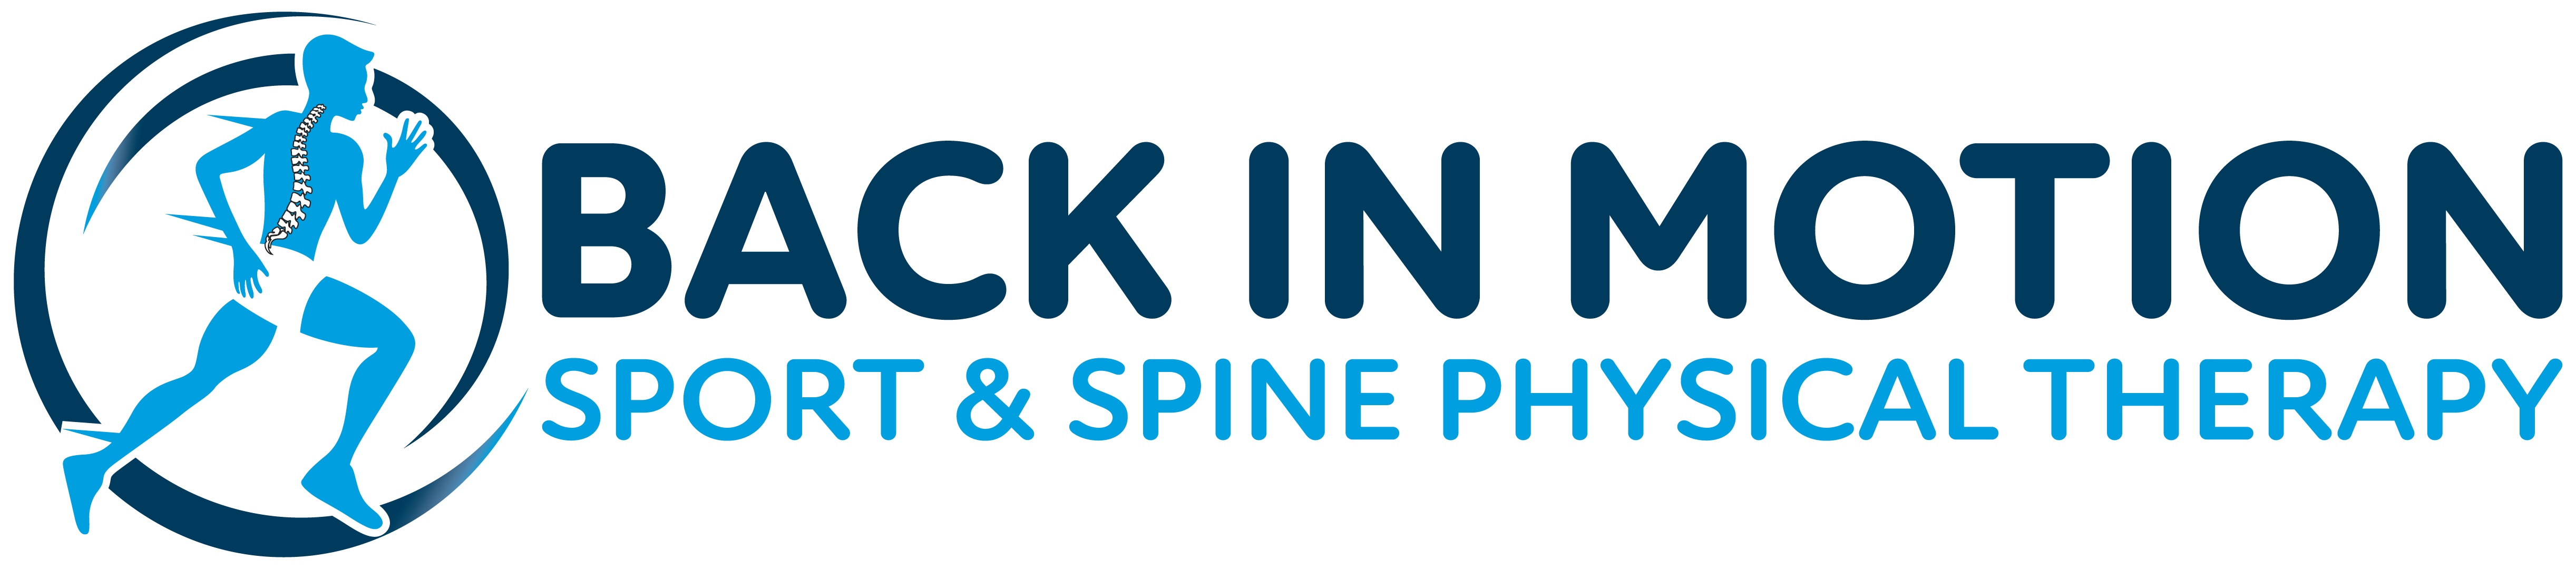 Back In Motion Sport & Spine Physical Therapy- Cape Coral, FL Photo